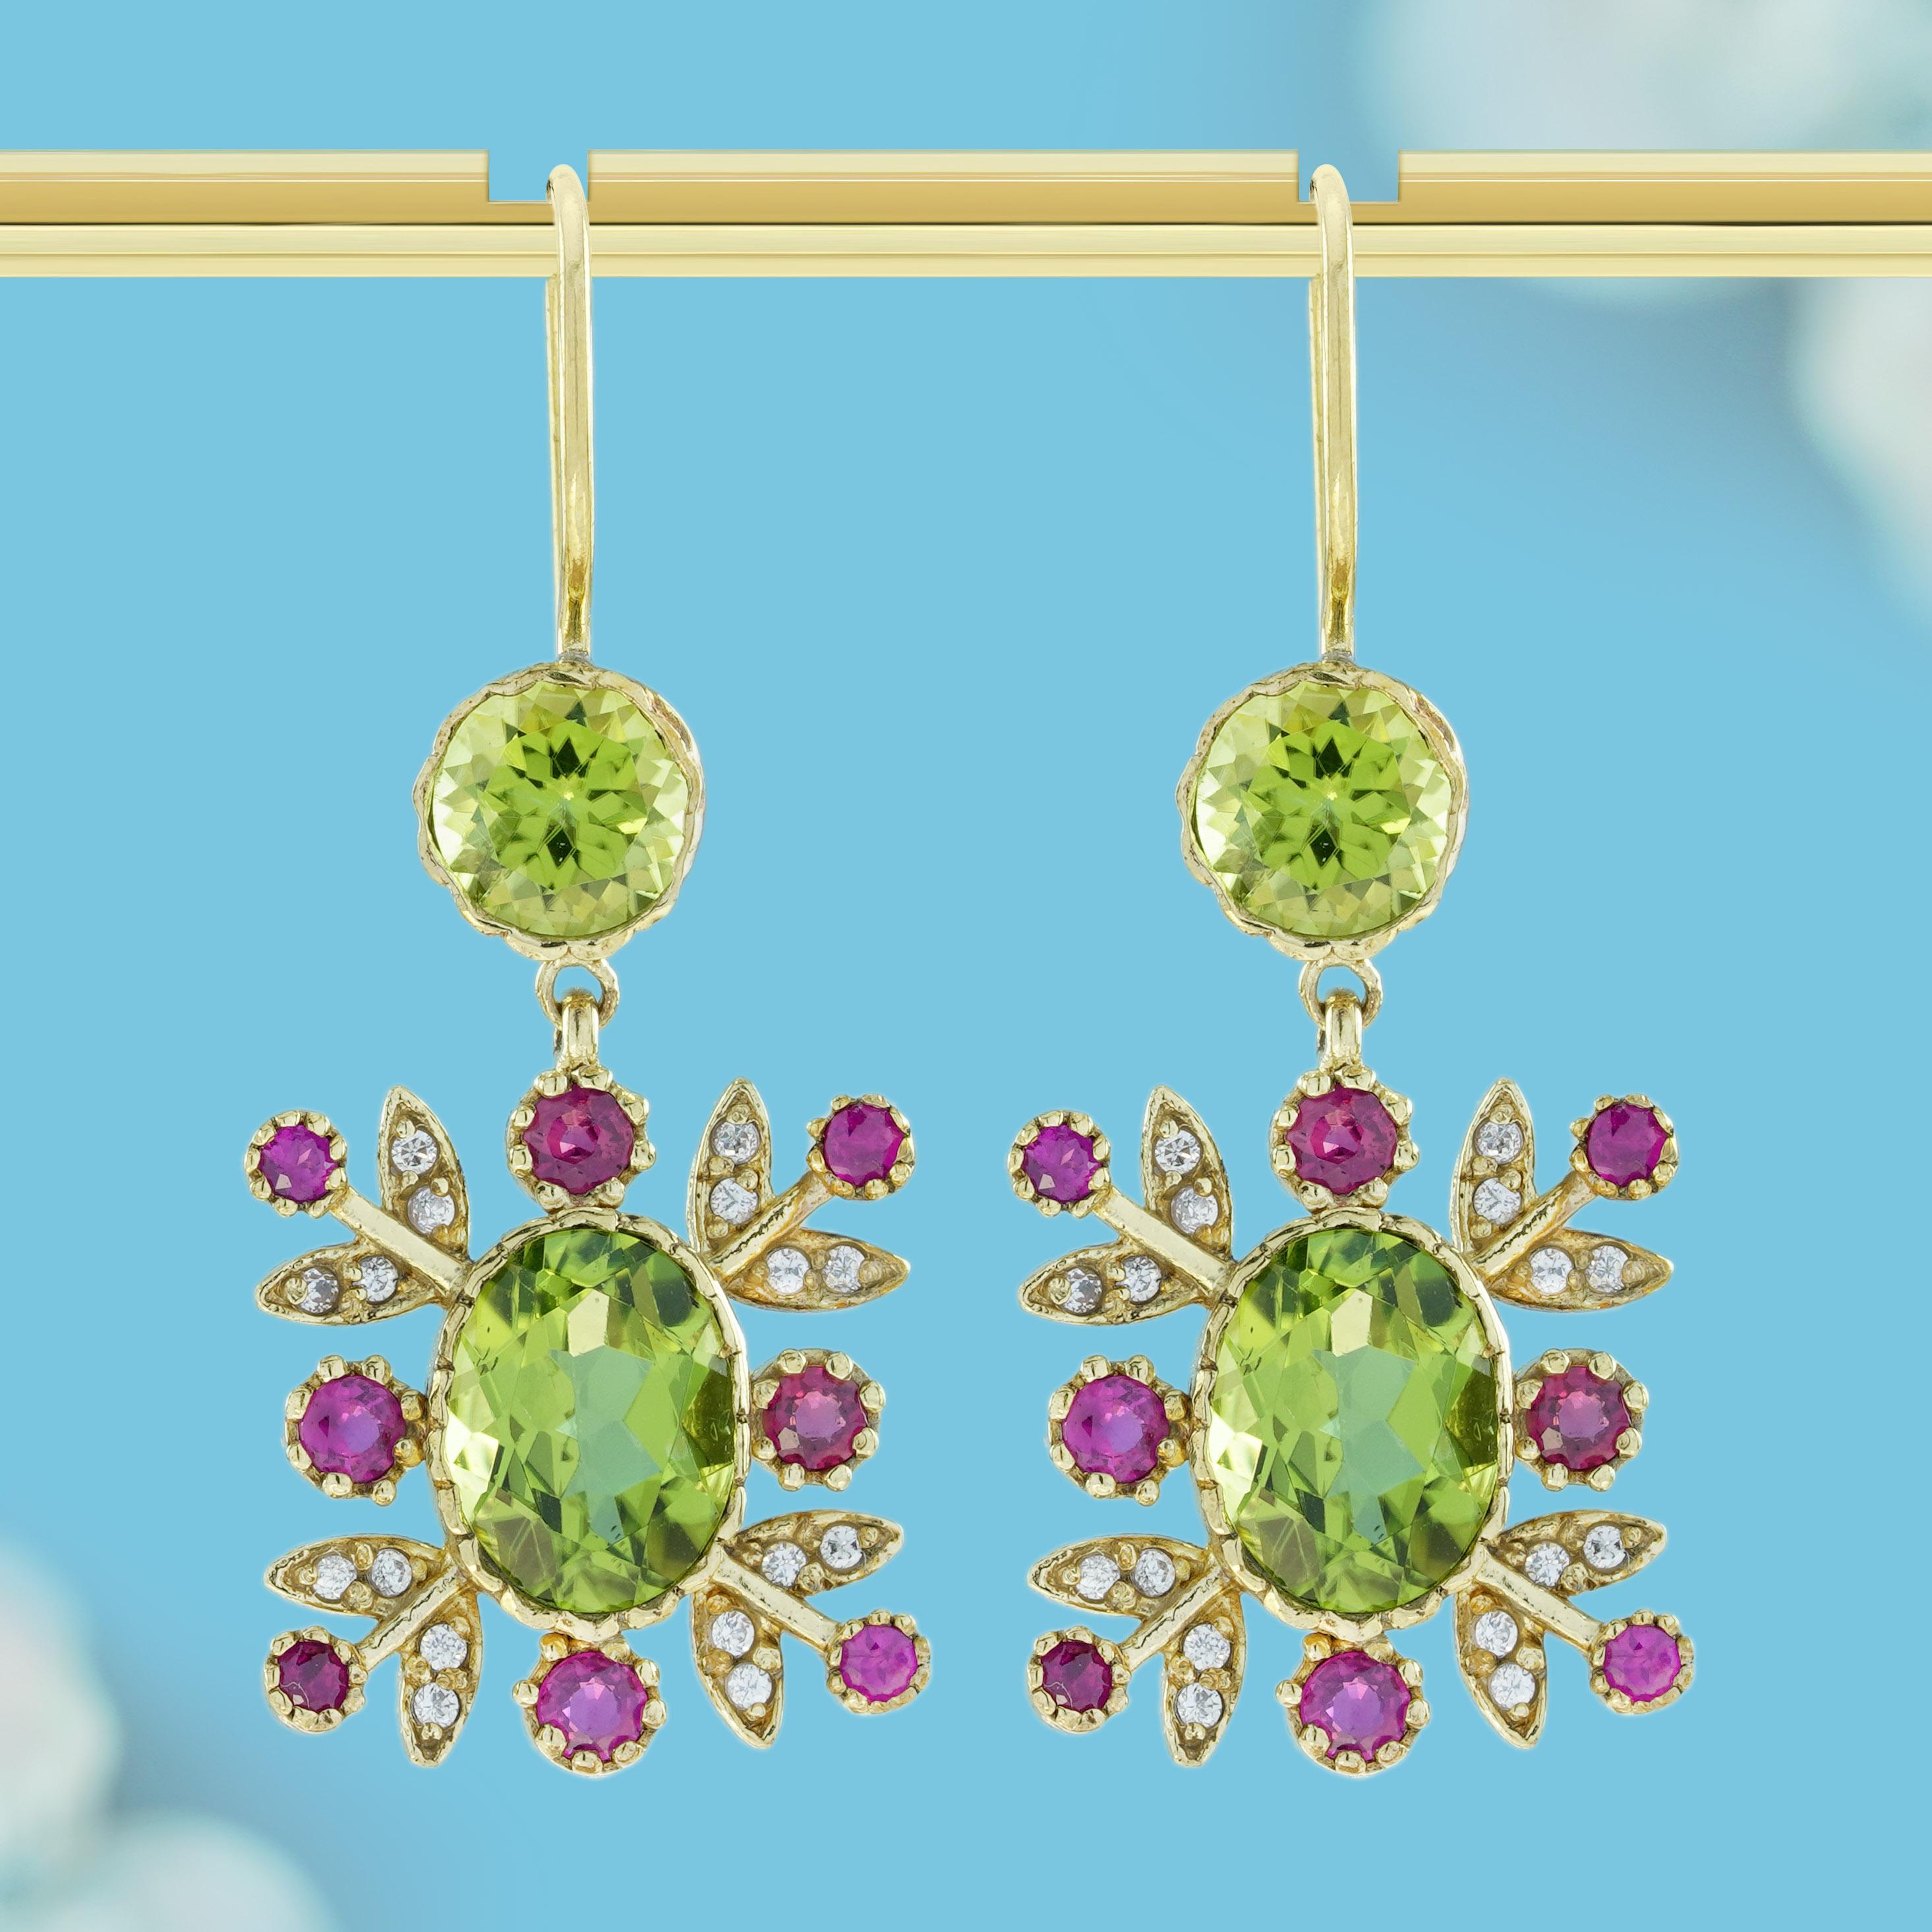 These vintage style earrings showcase vibrant lime green natural peridots in round shapes at the top and an oval-shaped peridot at the center. Surrounding the oval peridot are red round natural rubies, set within leaf-like frames adorned with